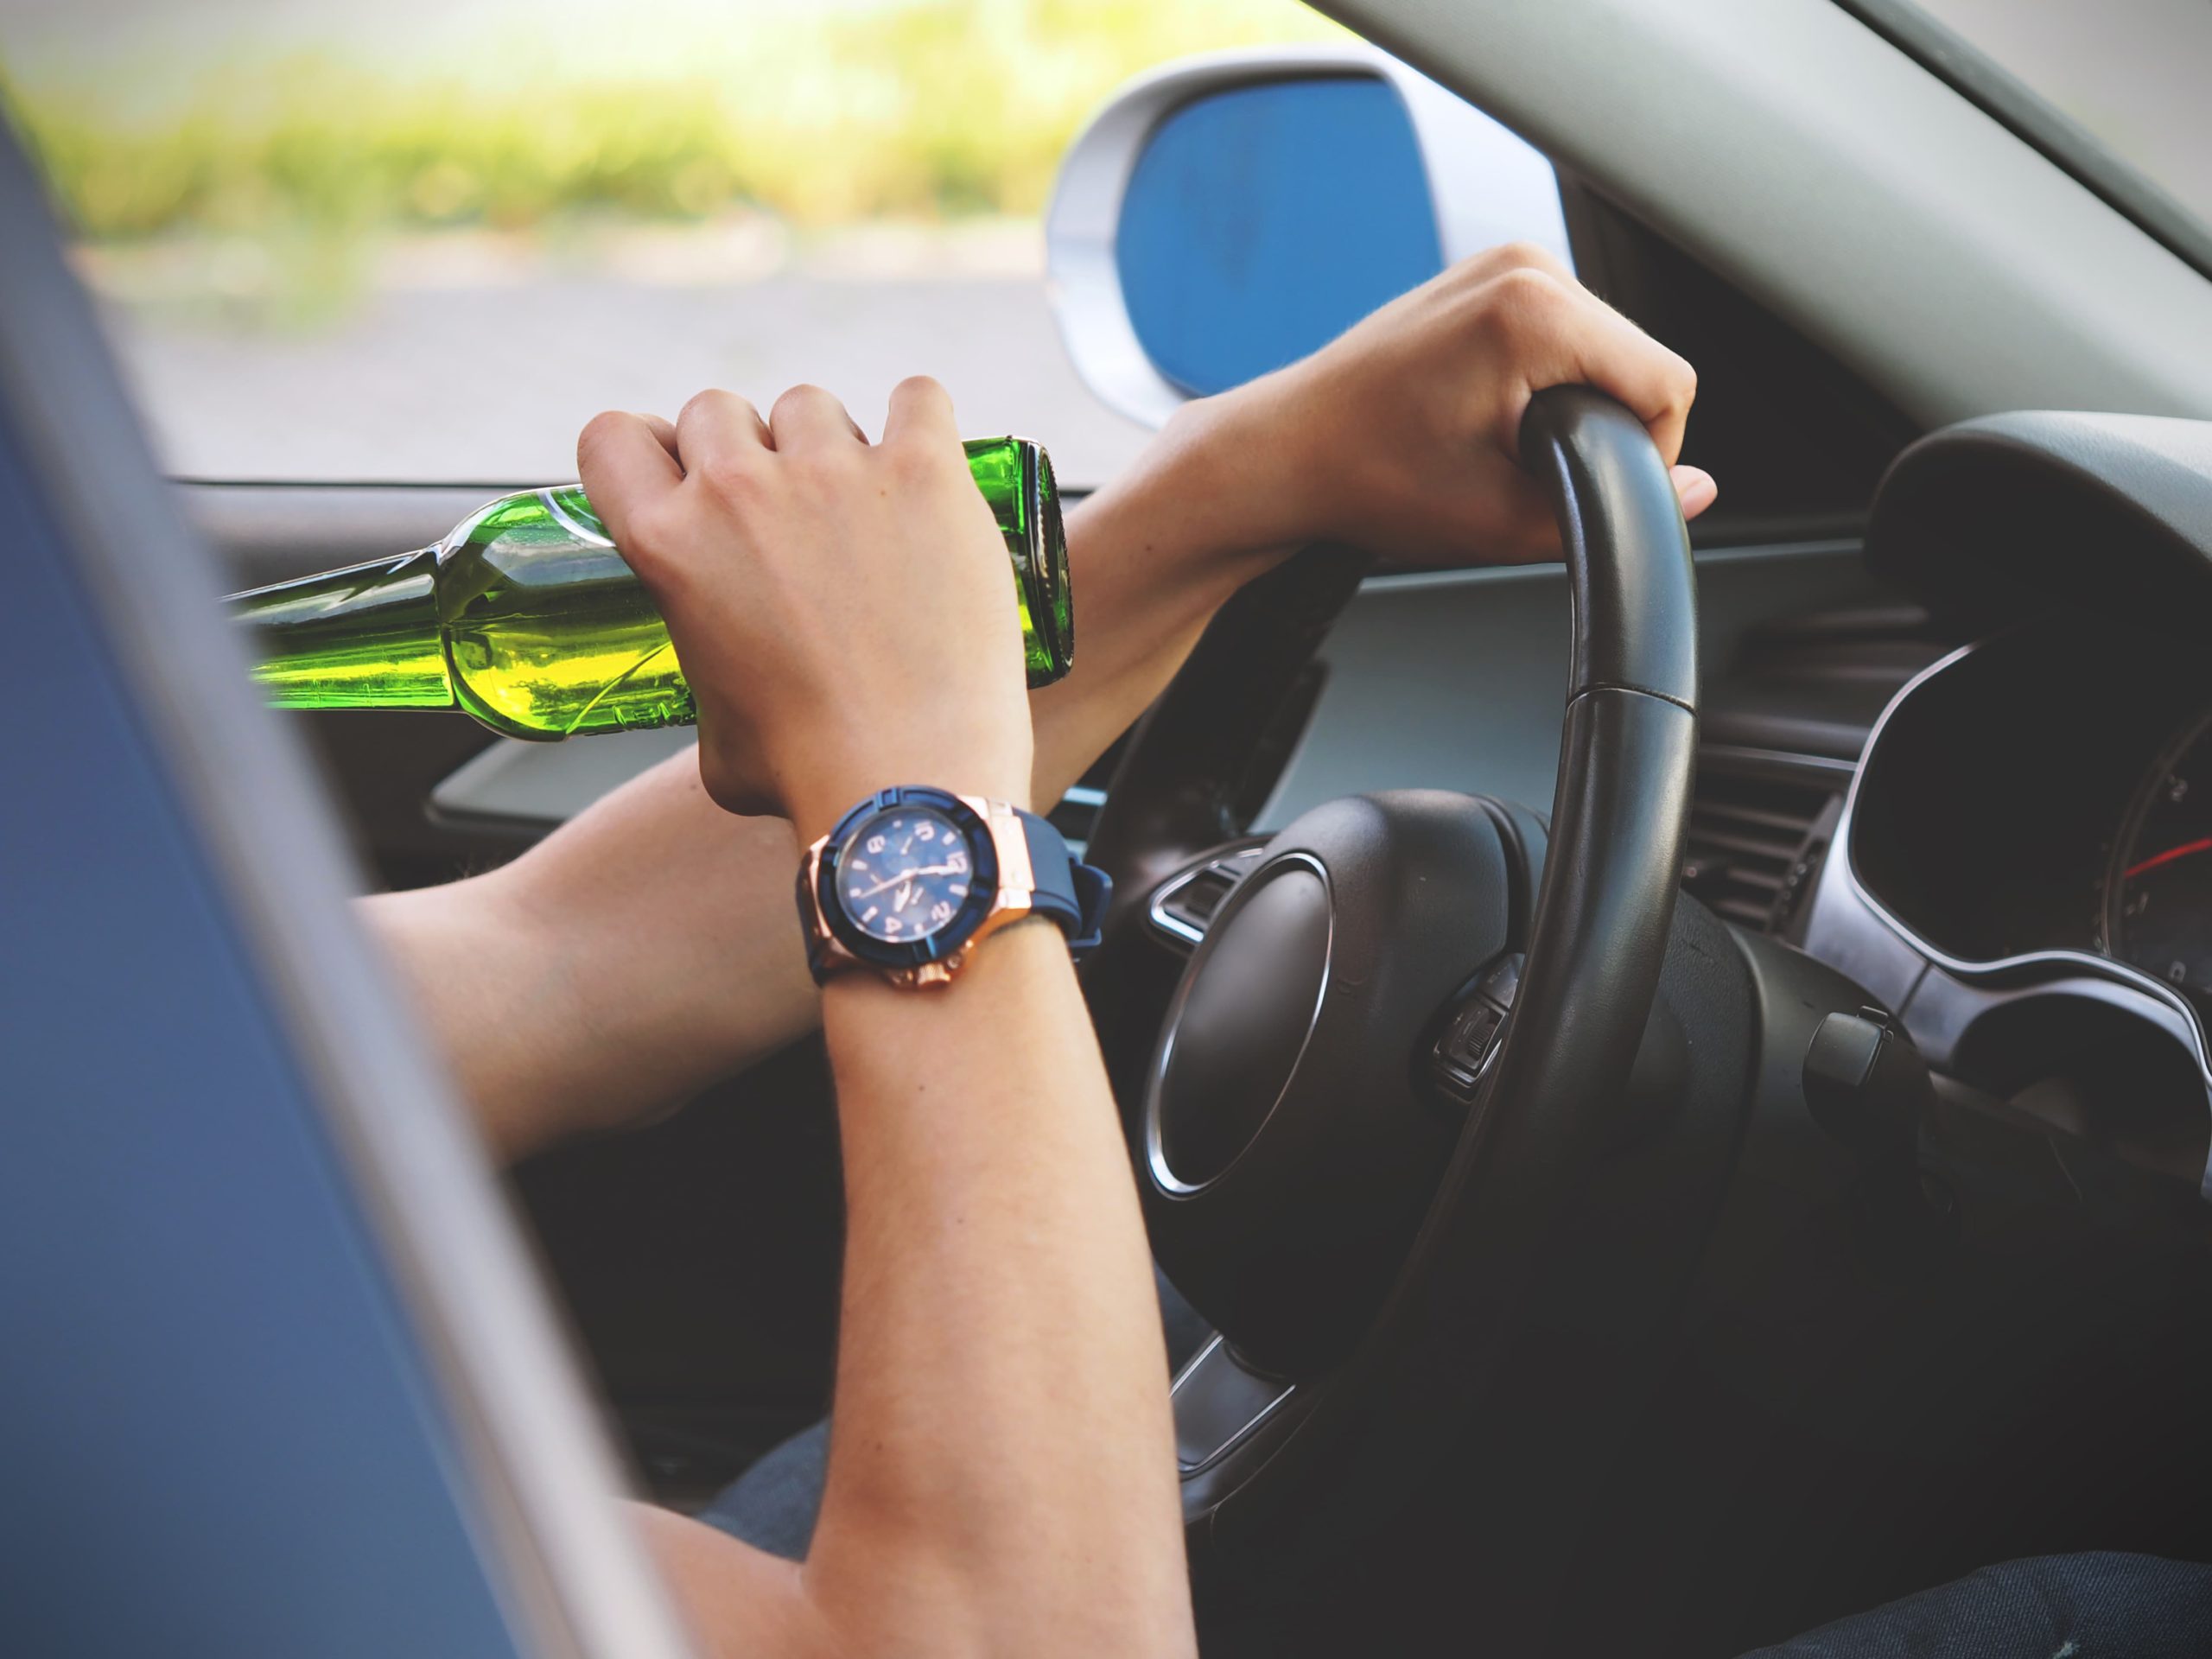 To Blow Or Not To Blow If You’re Drinking And Driving